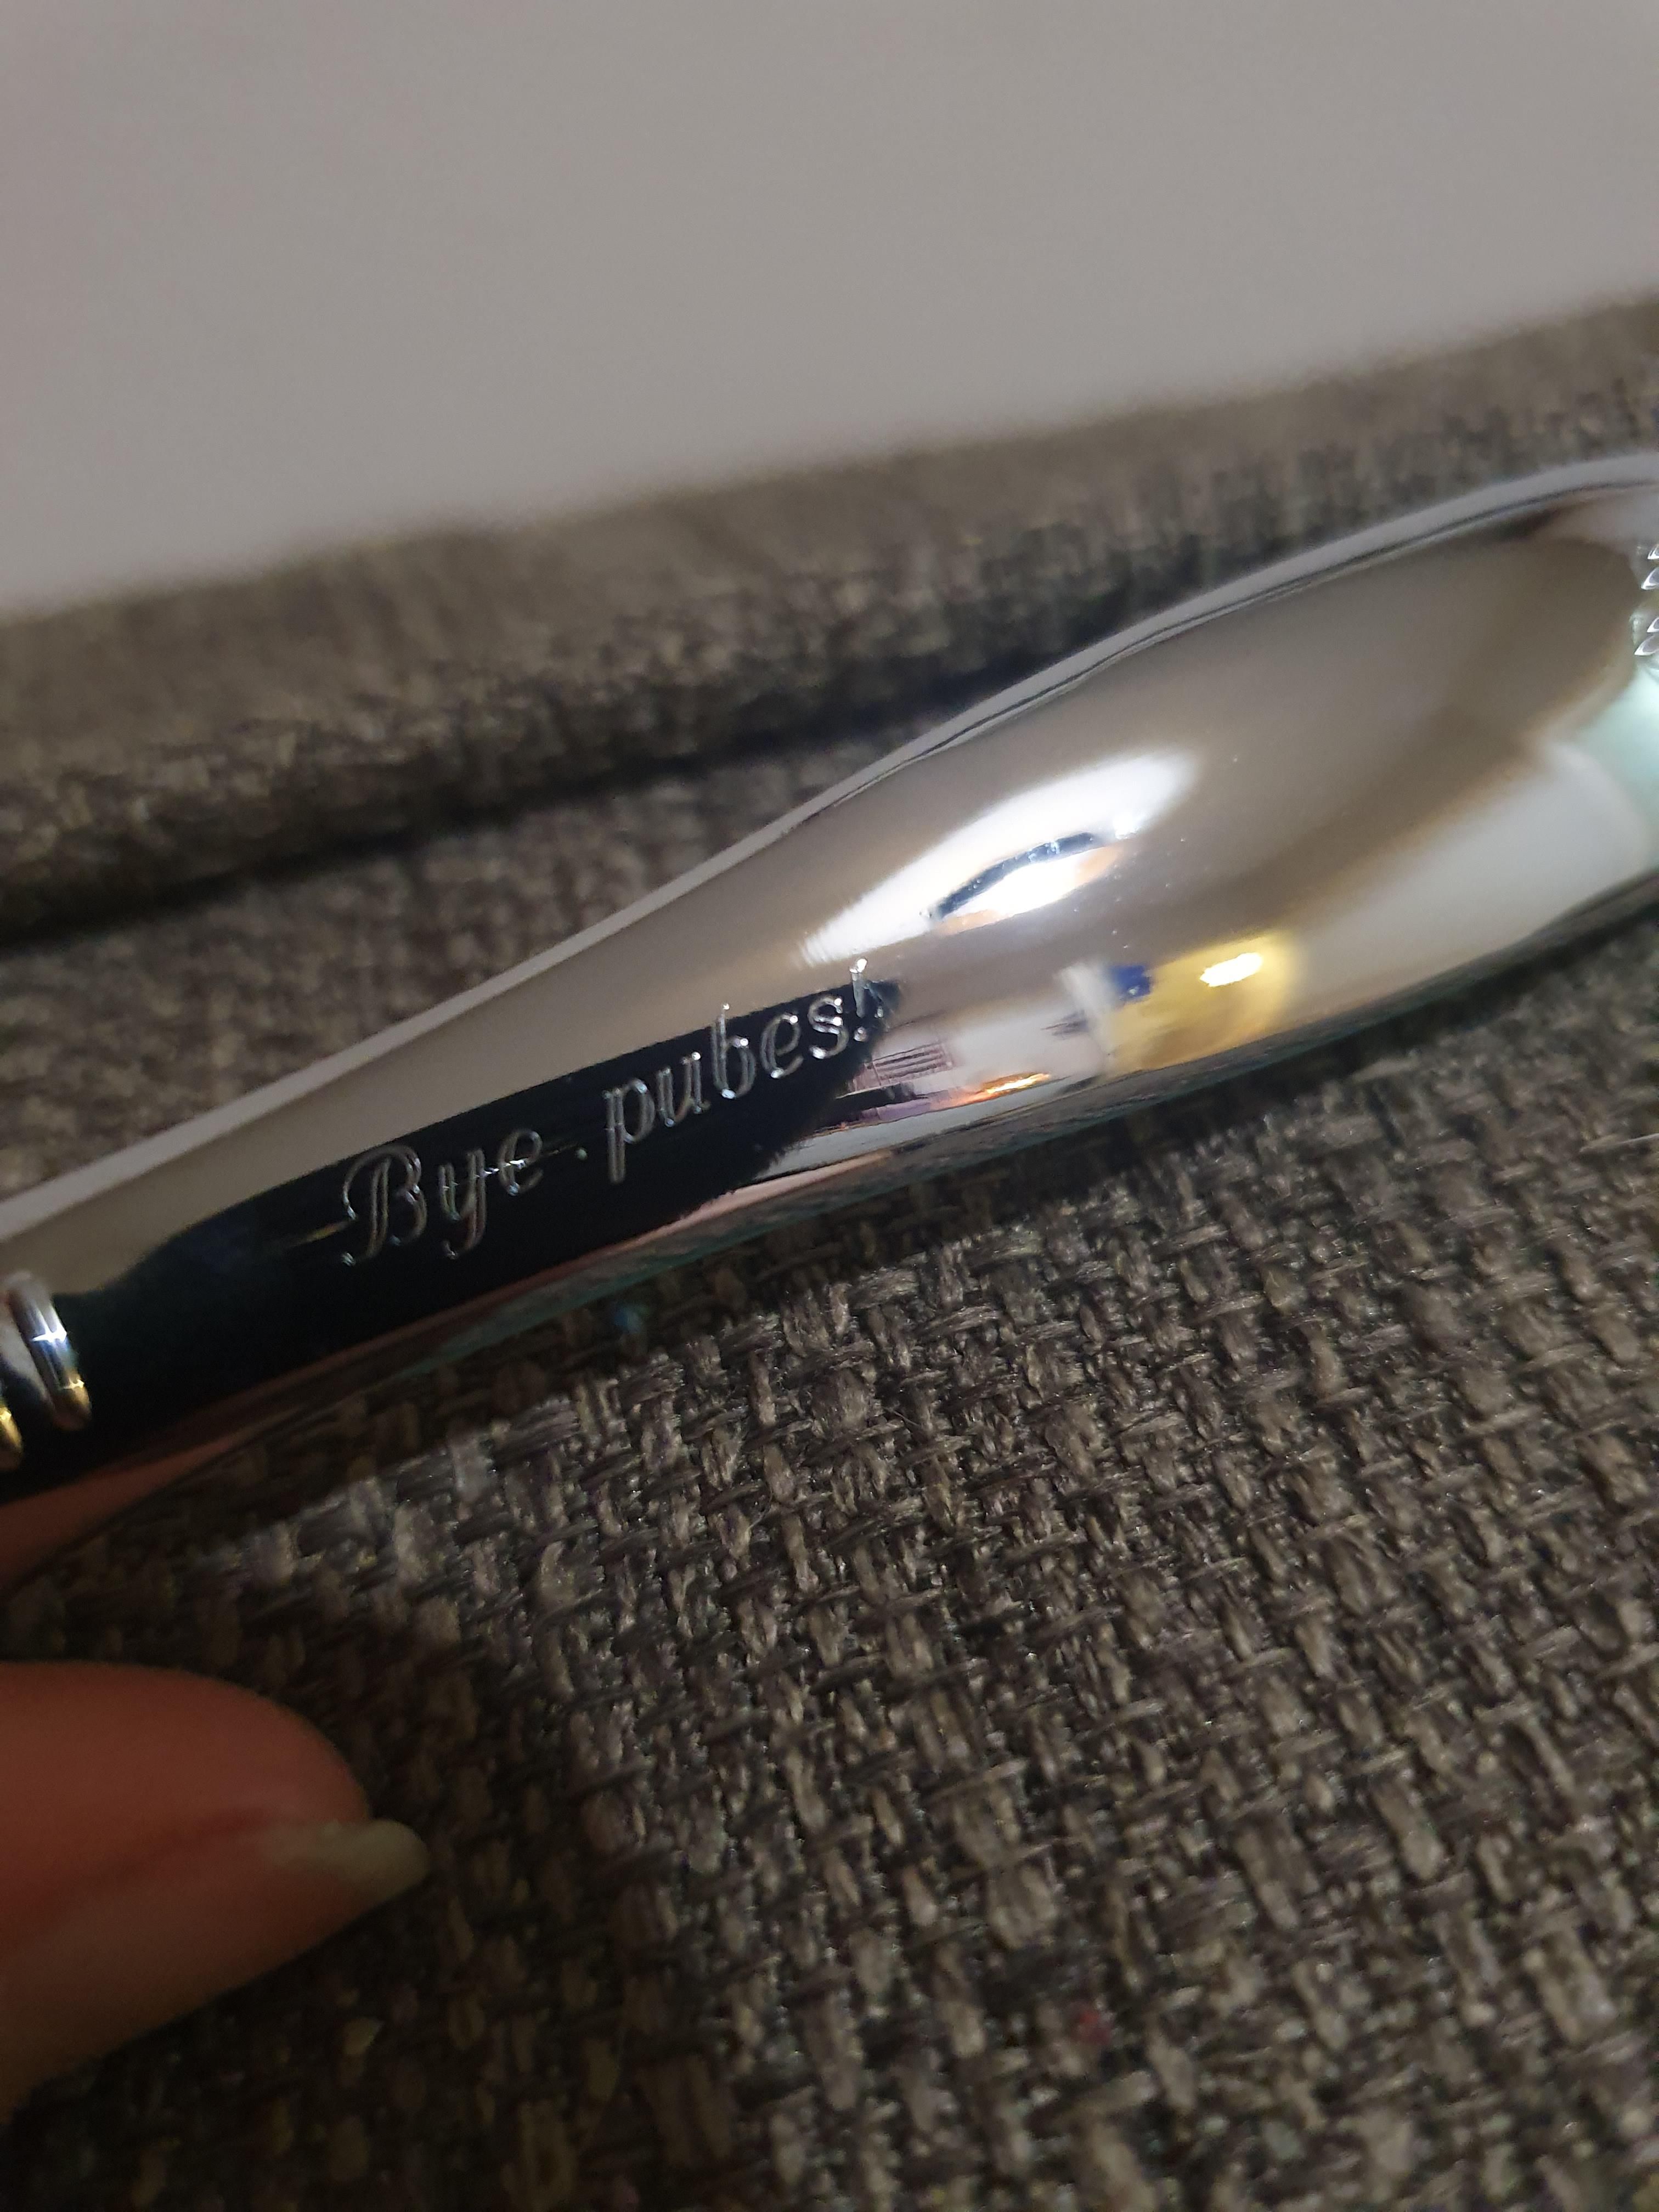 I asked for a nice razor for my birthday from my boyfriend, engraving was a free optional extra!